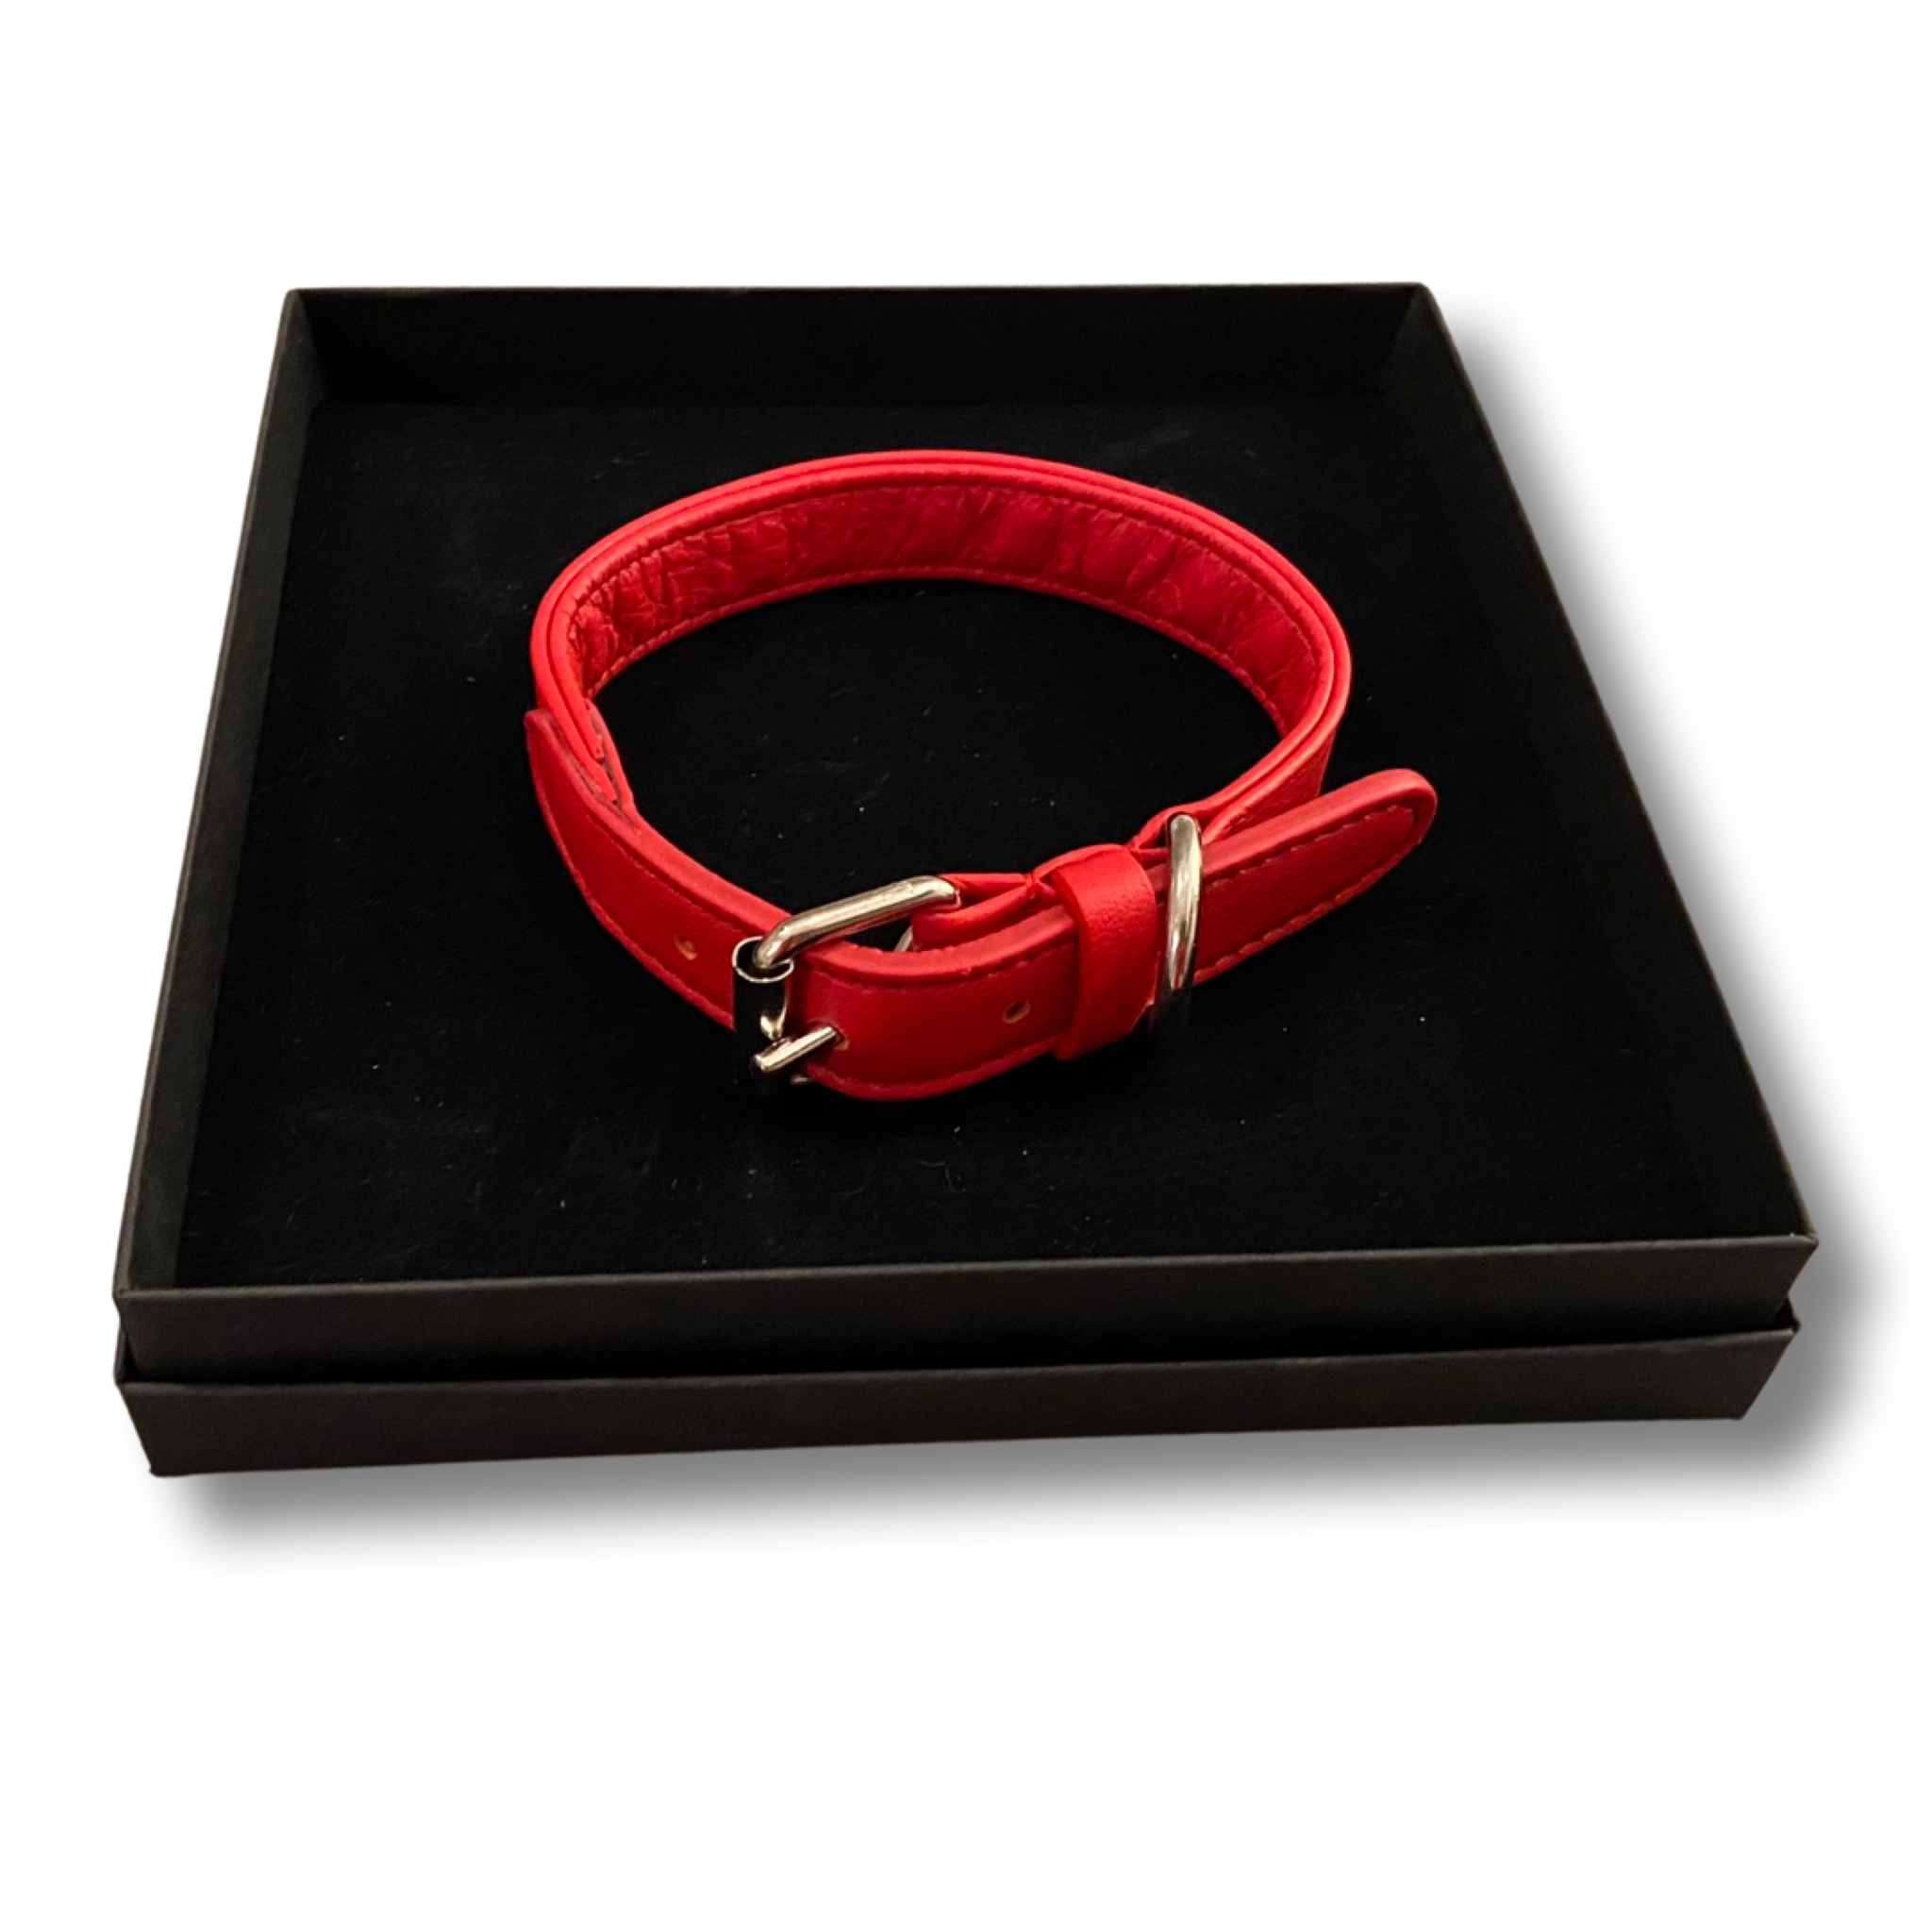 Leather collar - red